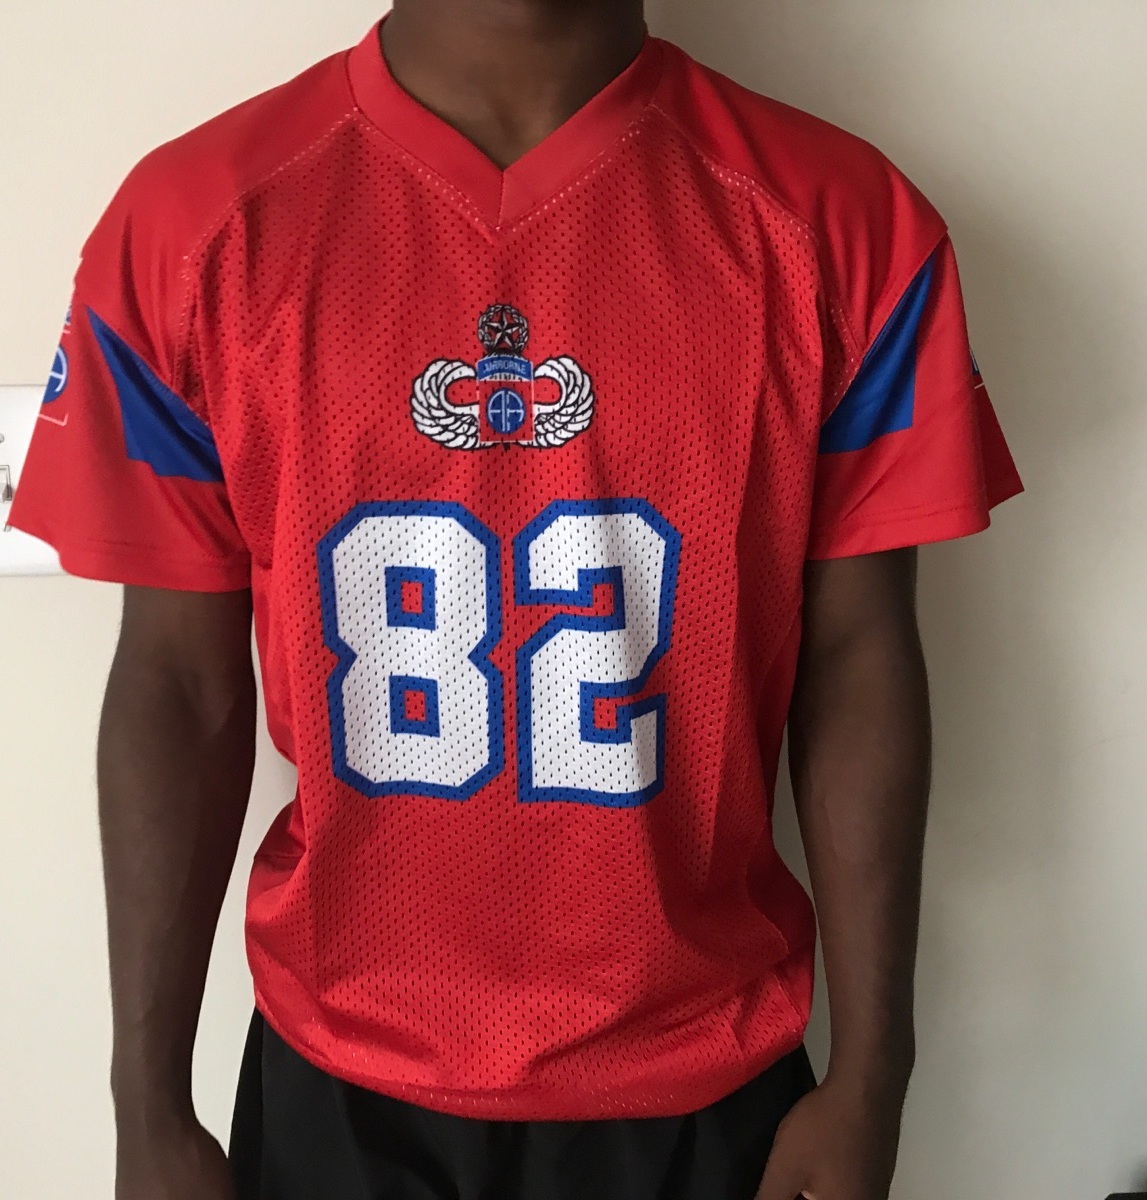 82nd airborne division football jersey